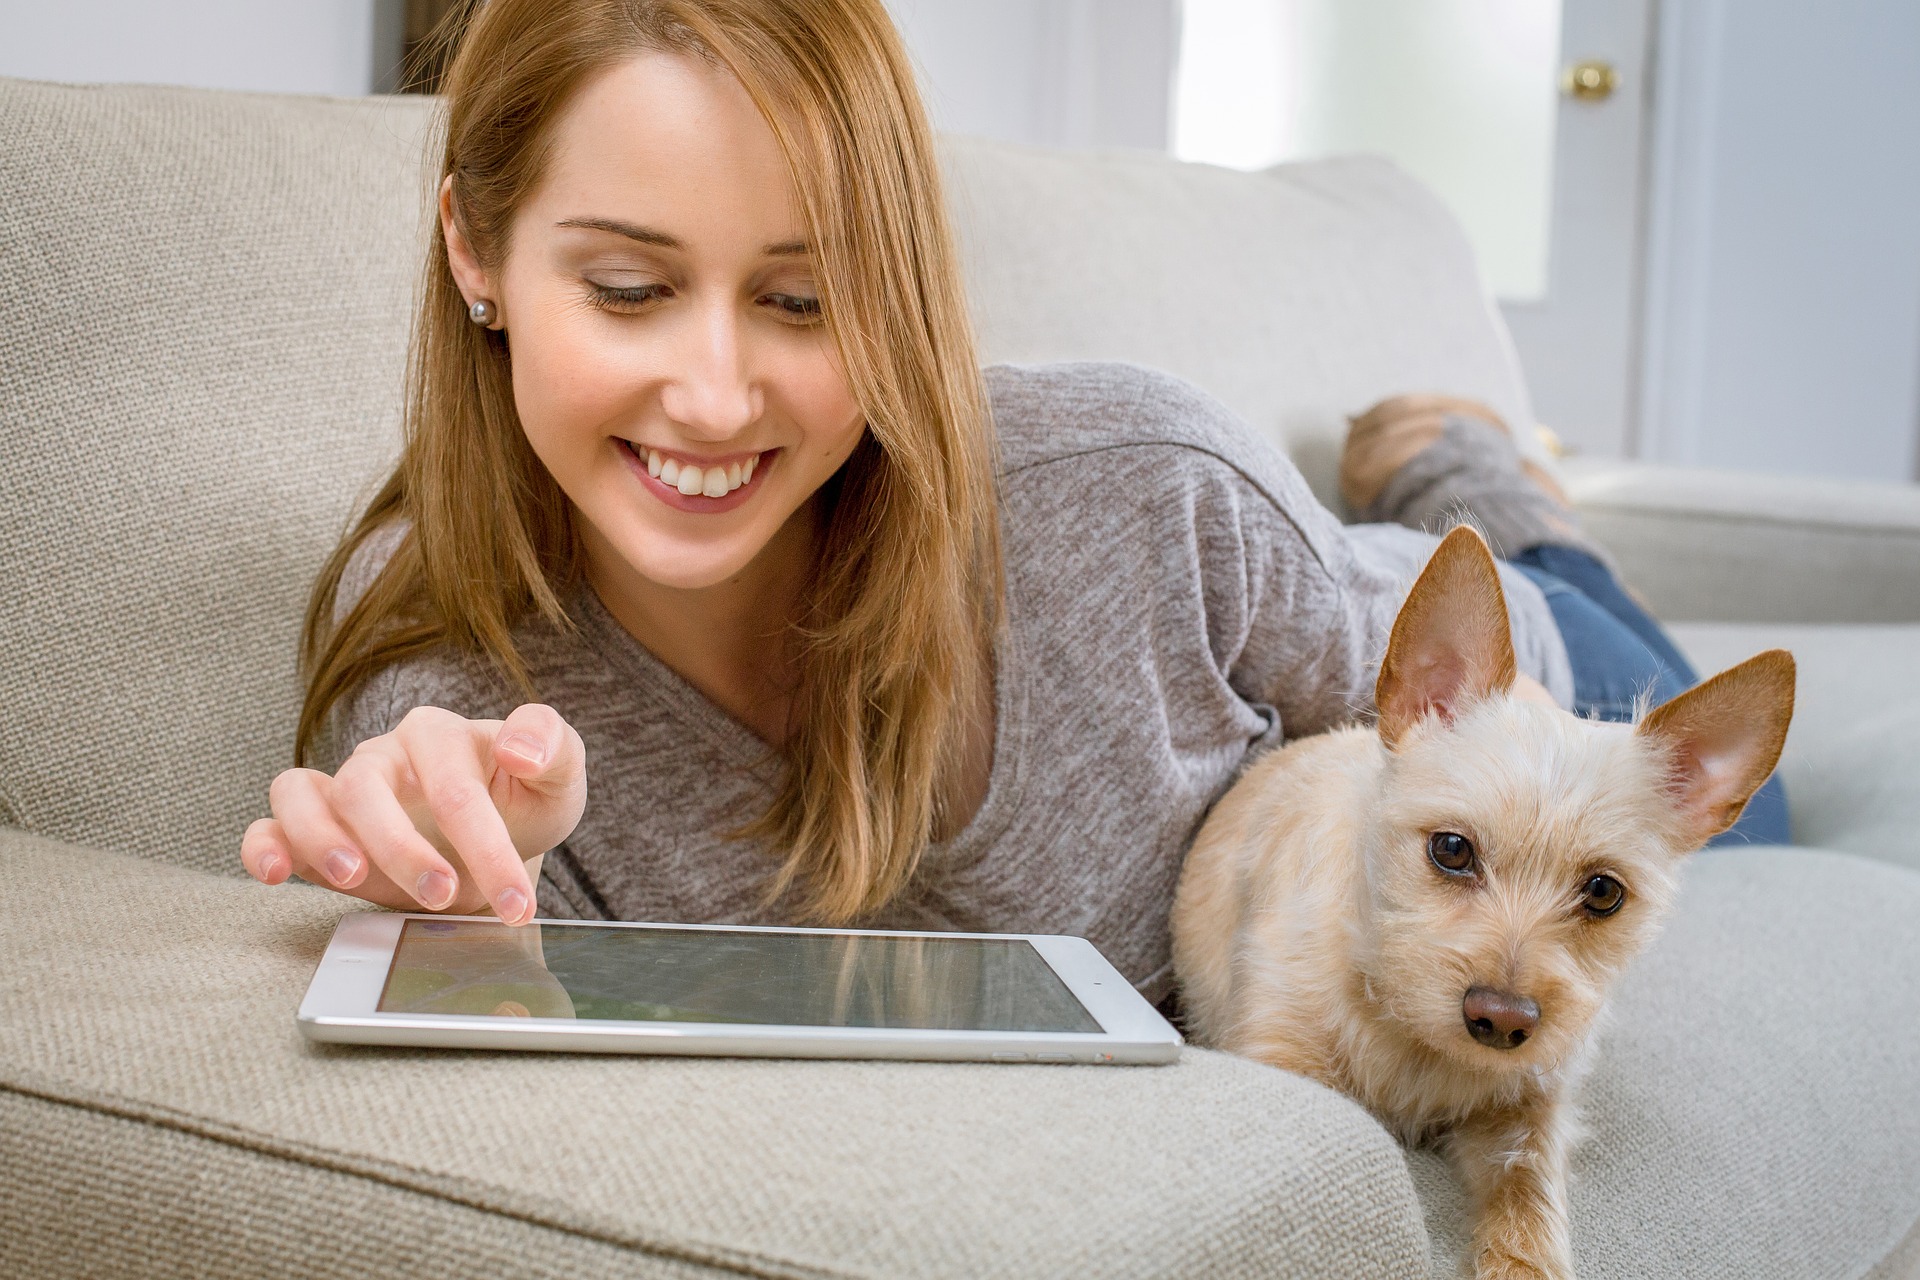 Woman with dog using tablet